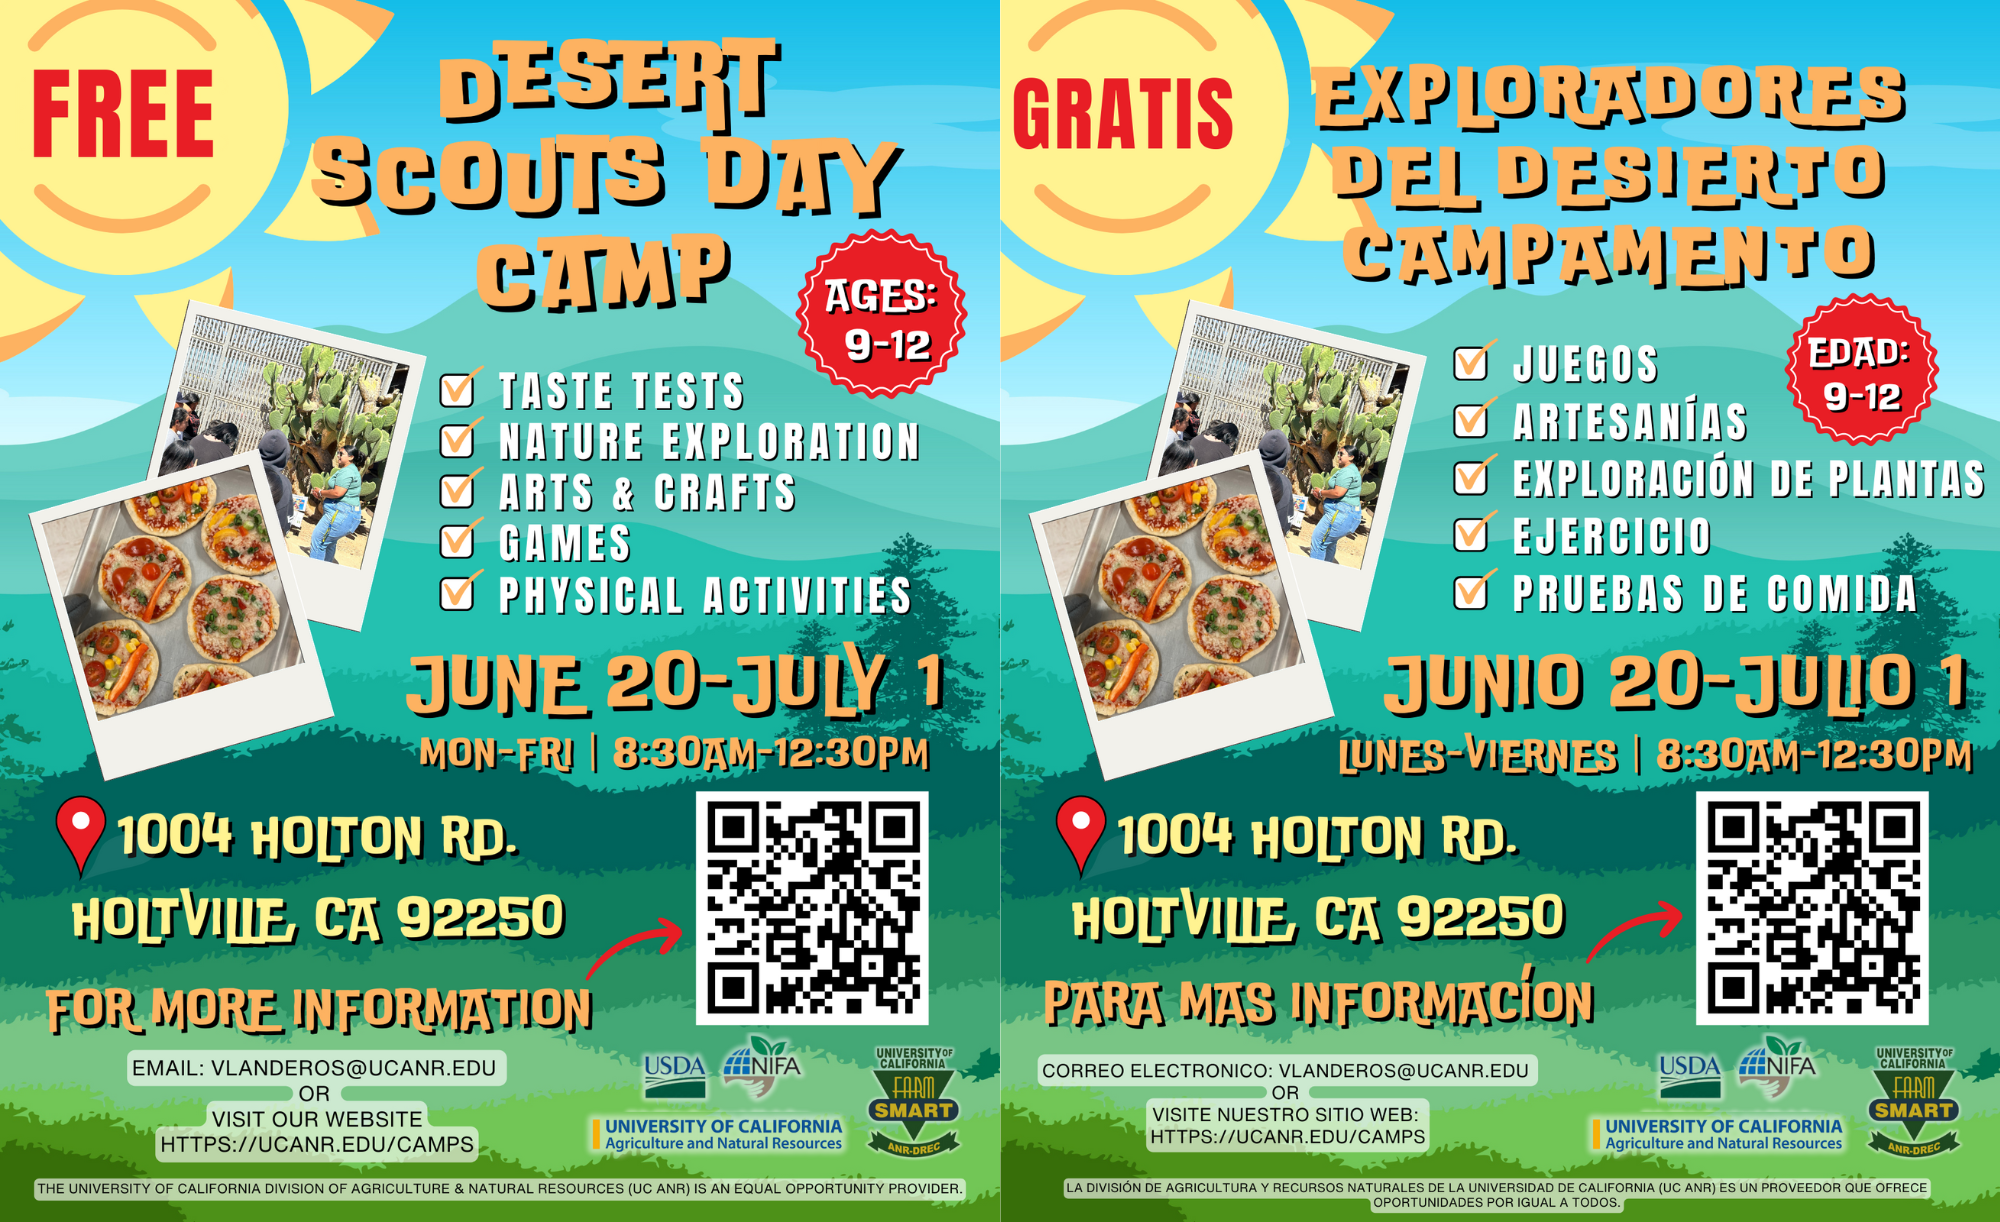 Desert Scouts Day Camp